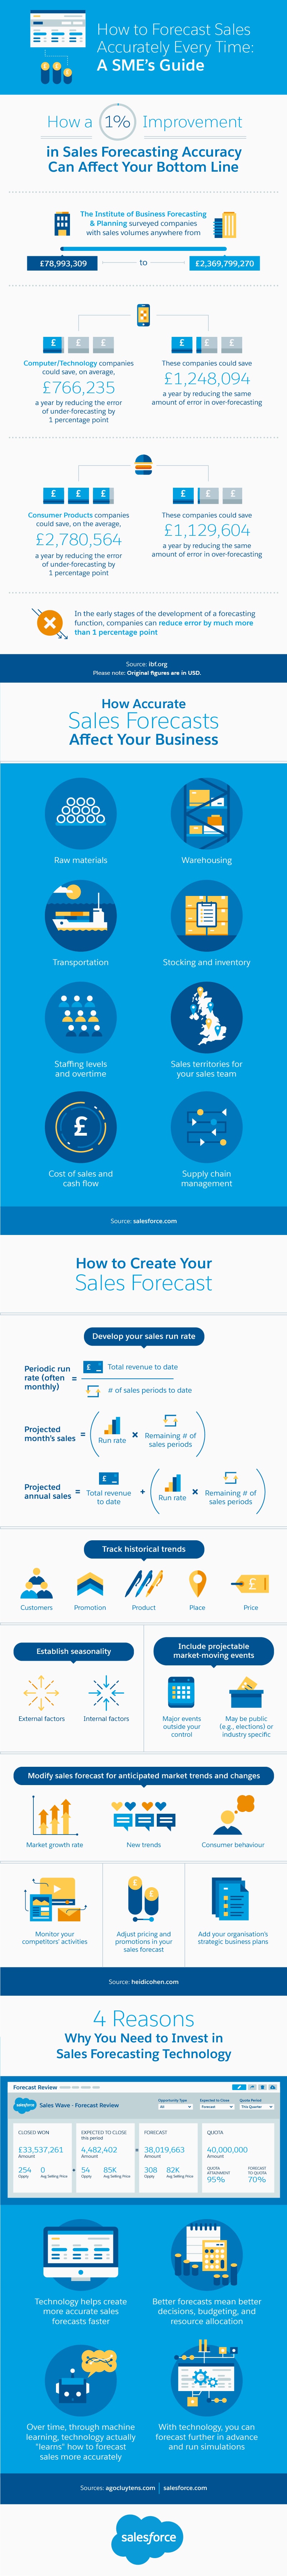 How to Forecast Sales Accurately Every Time: An SME's Guide